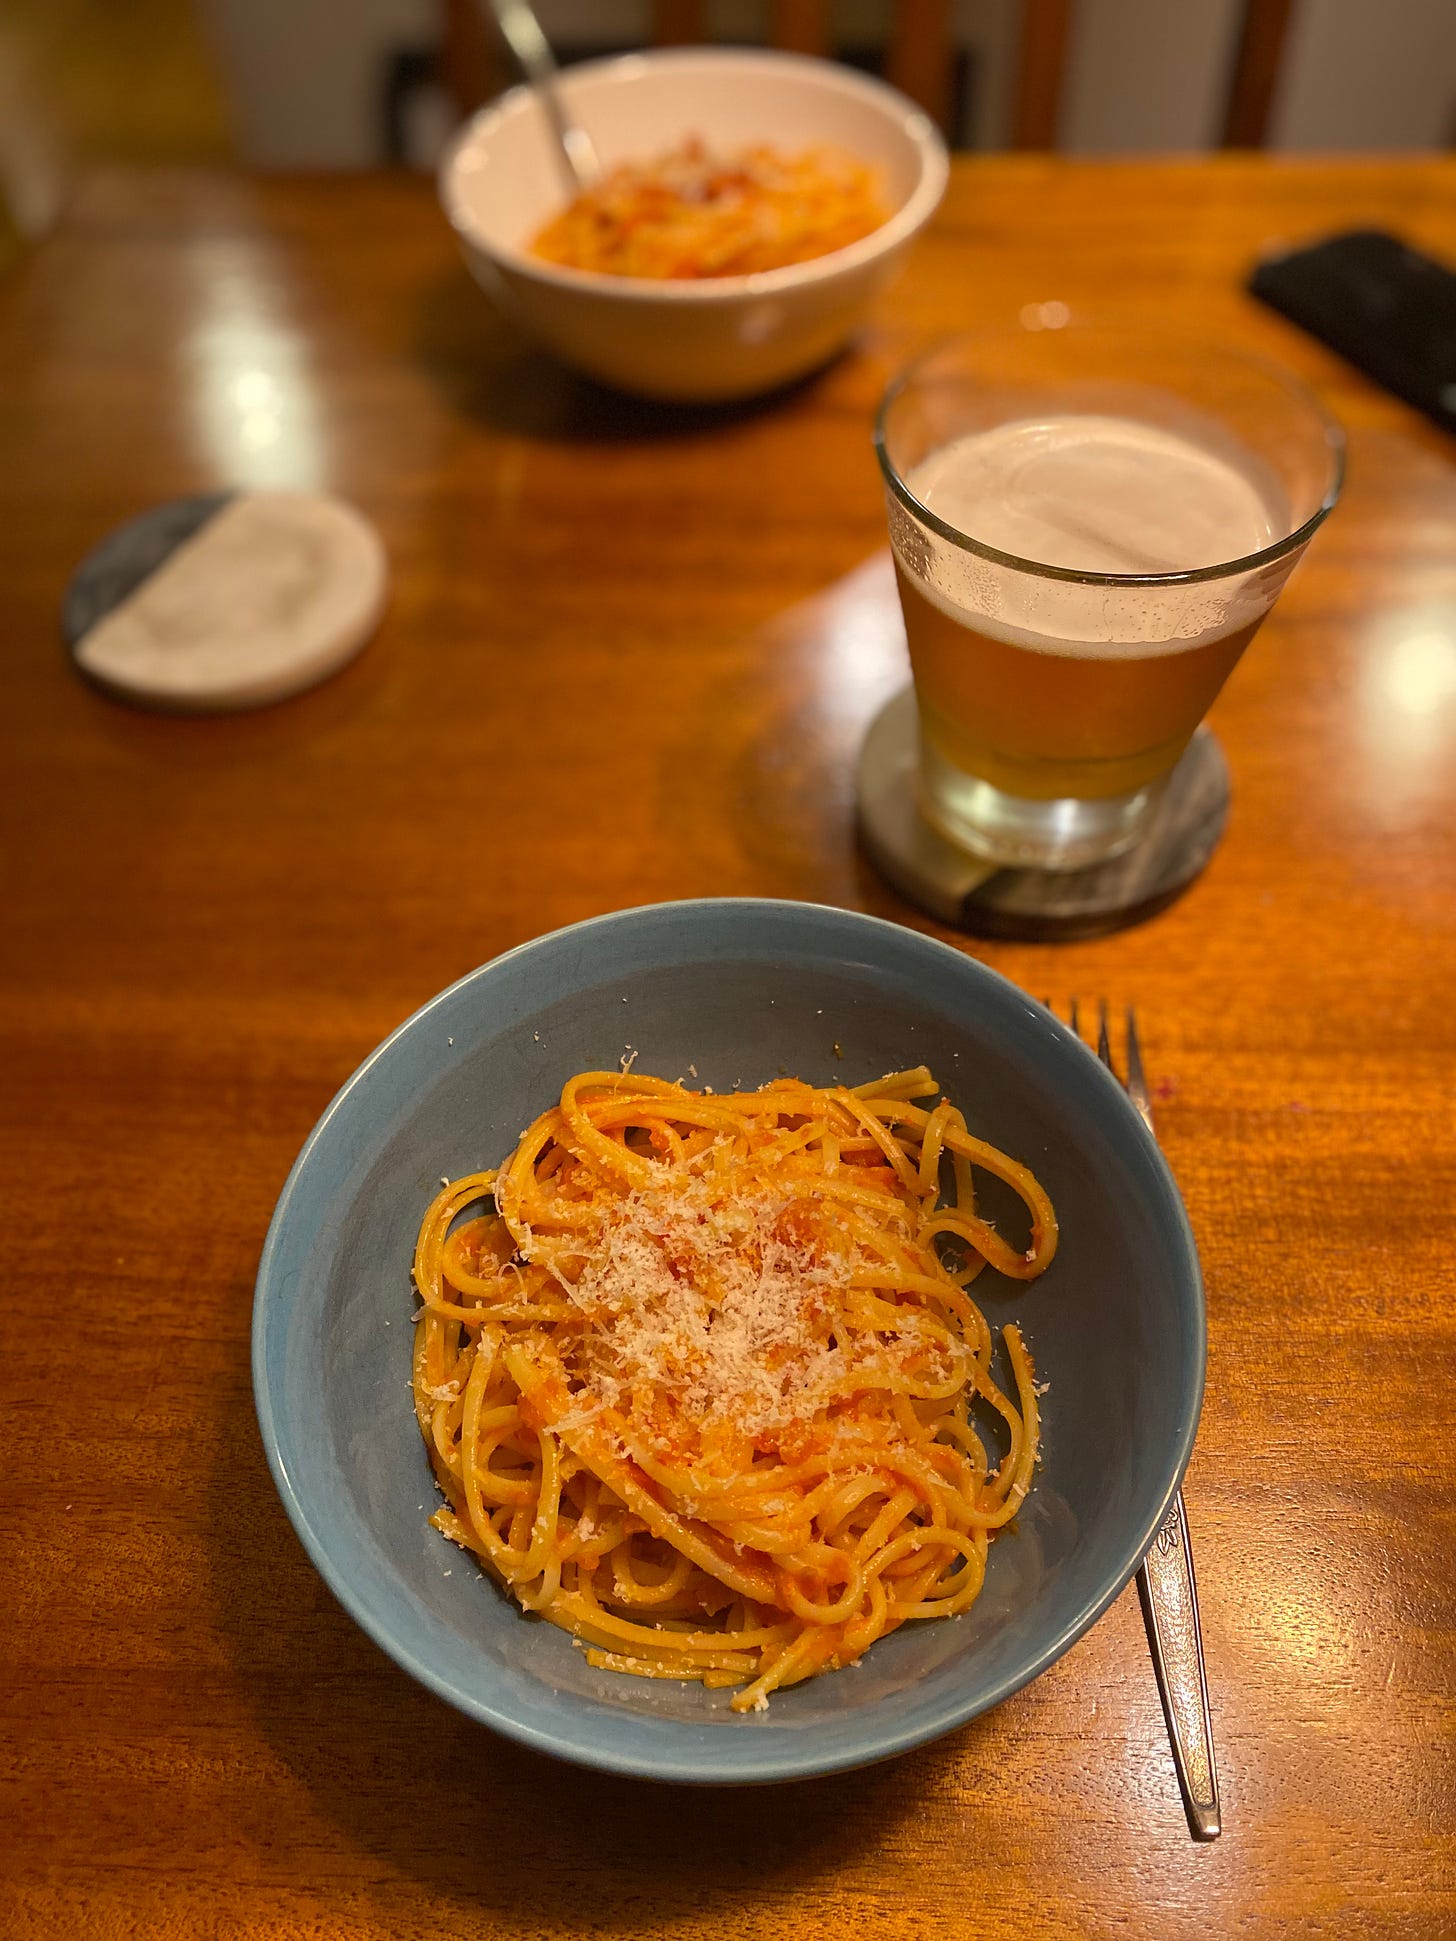 A blue bowl of pasta in tomato sauce, with parmesan cheese on top. On a coaster behind it is a glass of pale ale, and in the background is a white bowl of the same pasta.